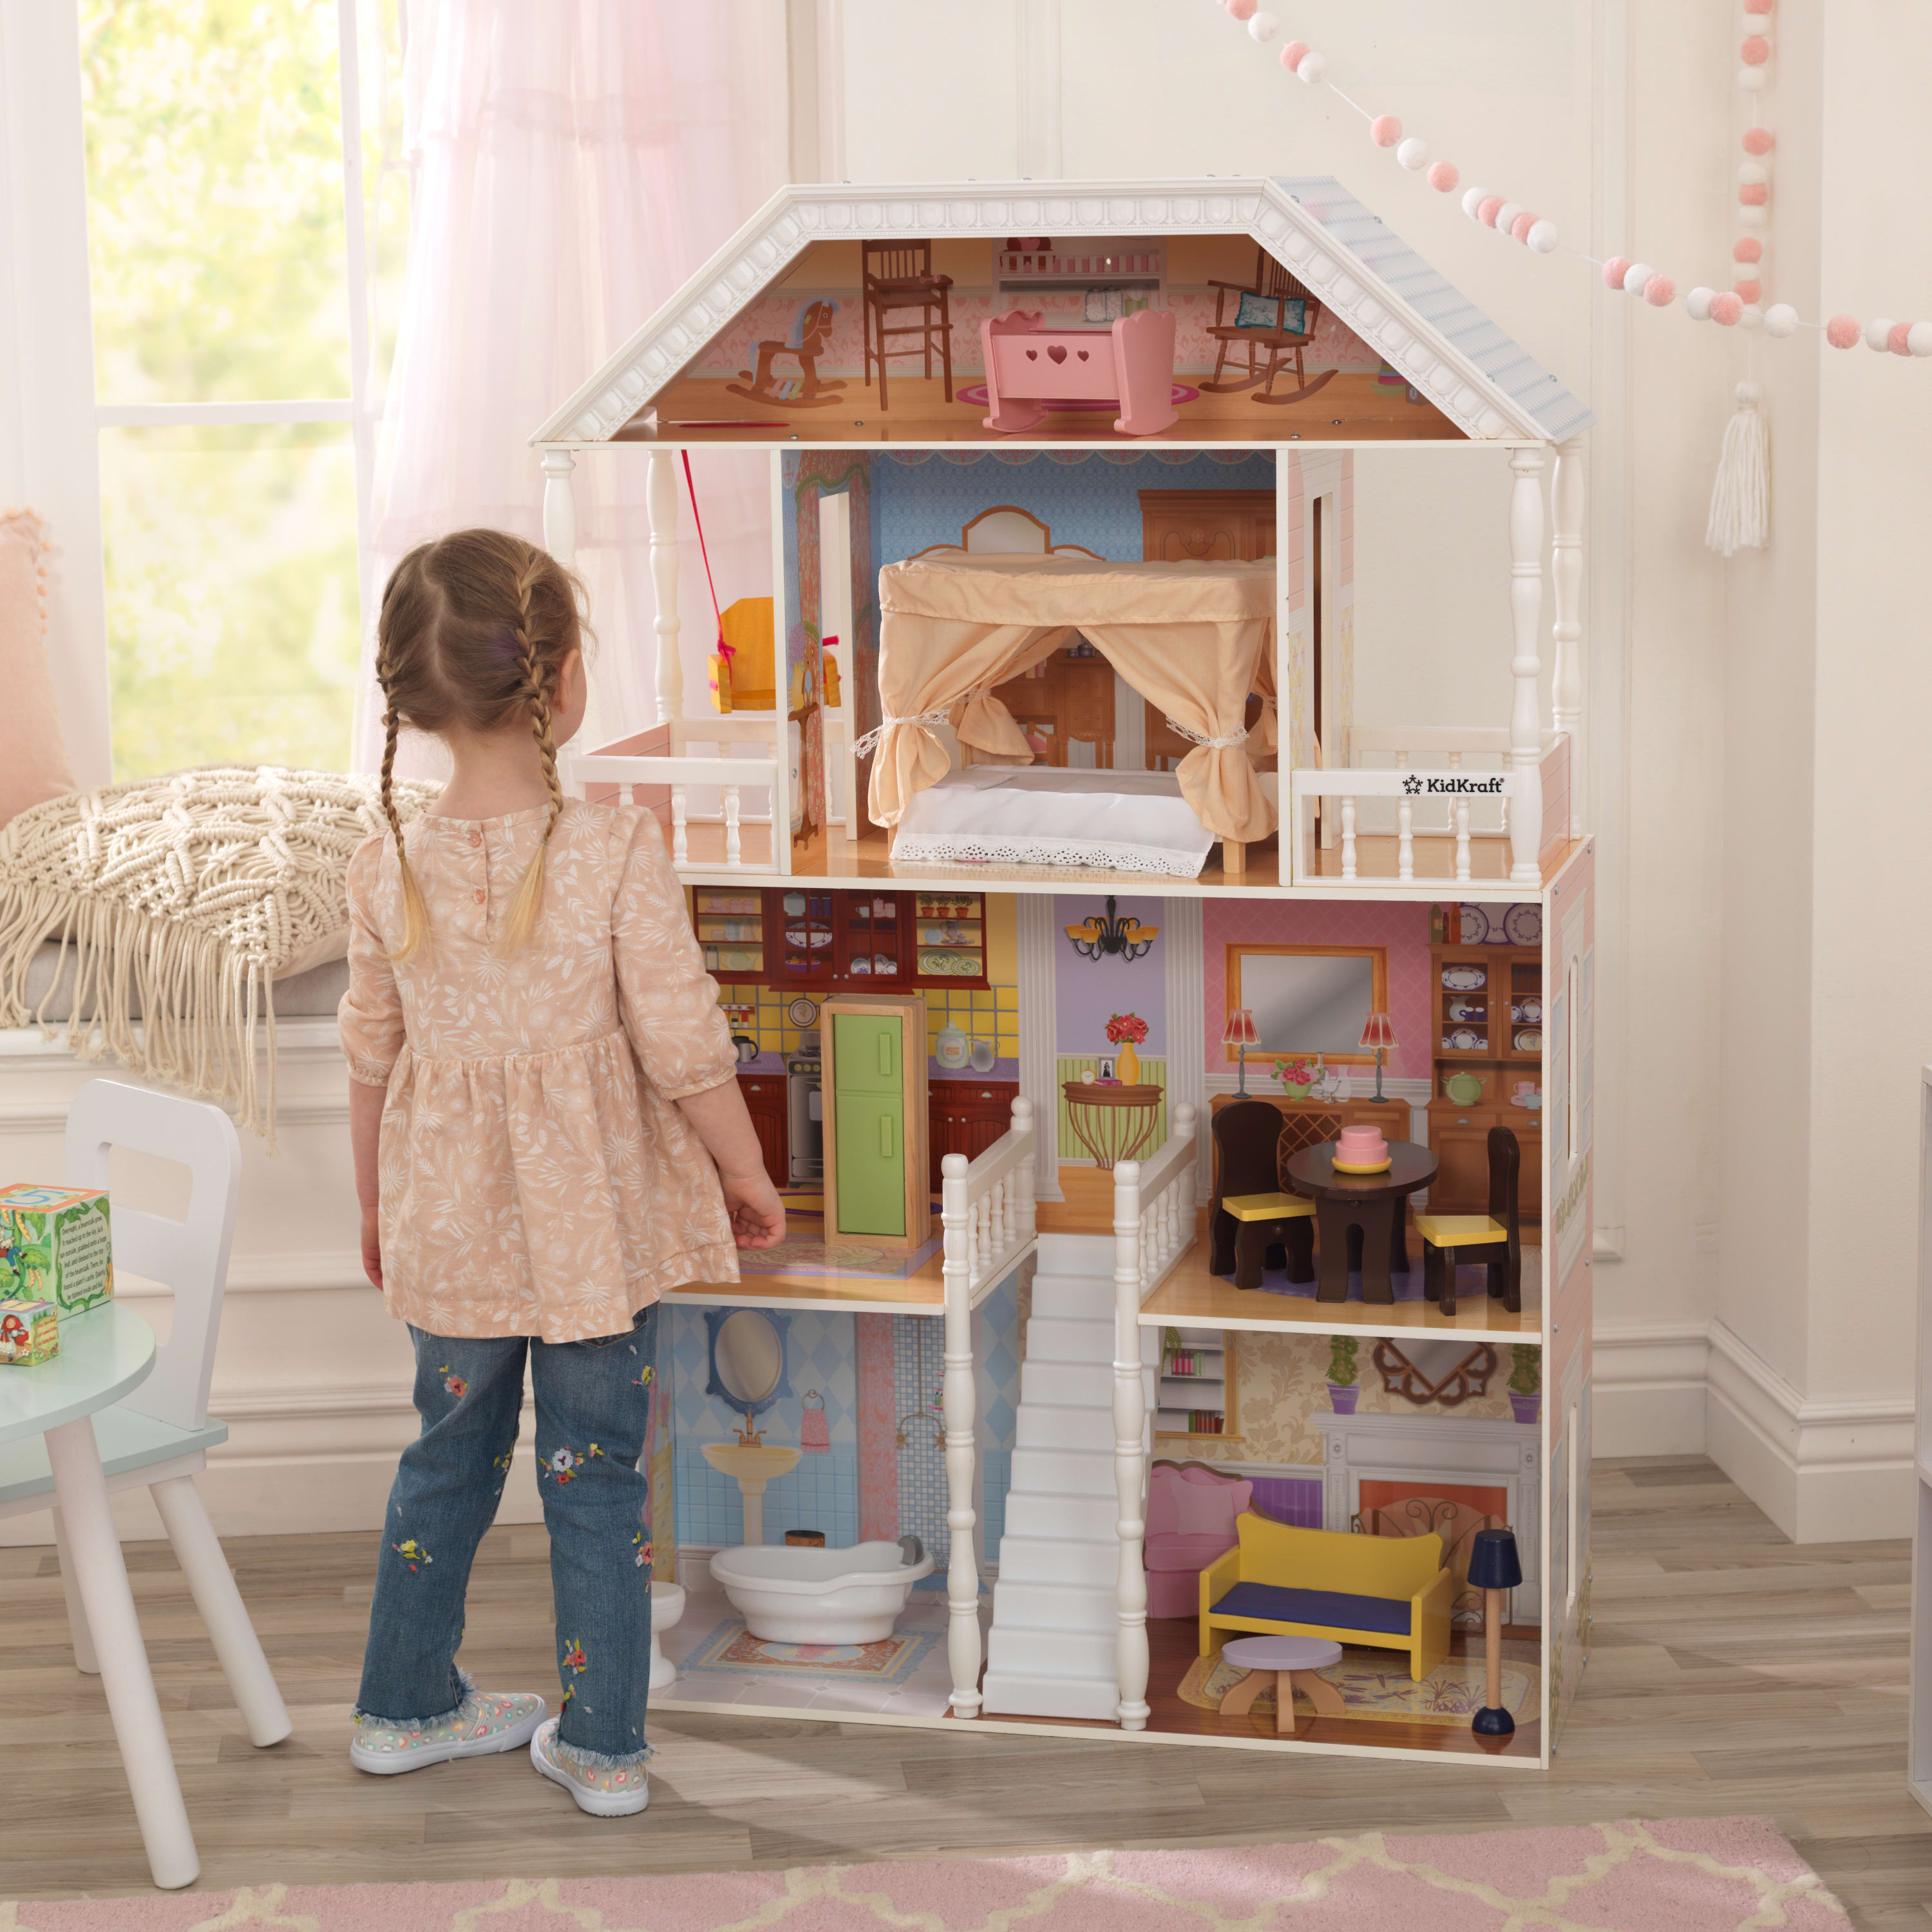 KidKraft Savannah Wooden Dollhouse with Porch Swing and 14 Accessories, Ages 3 and up - image 4 of 10